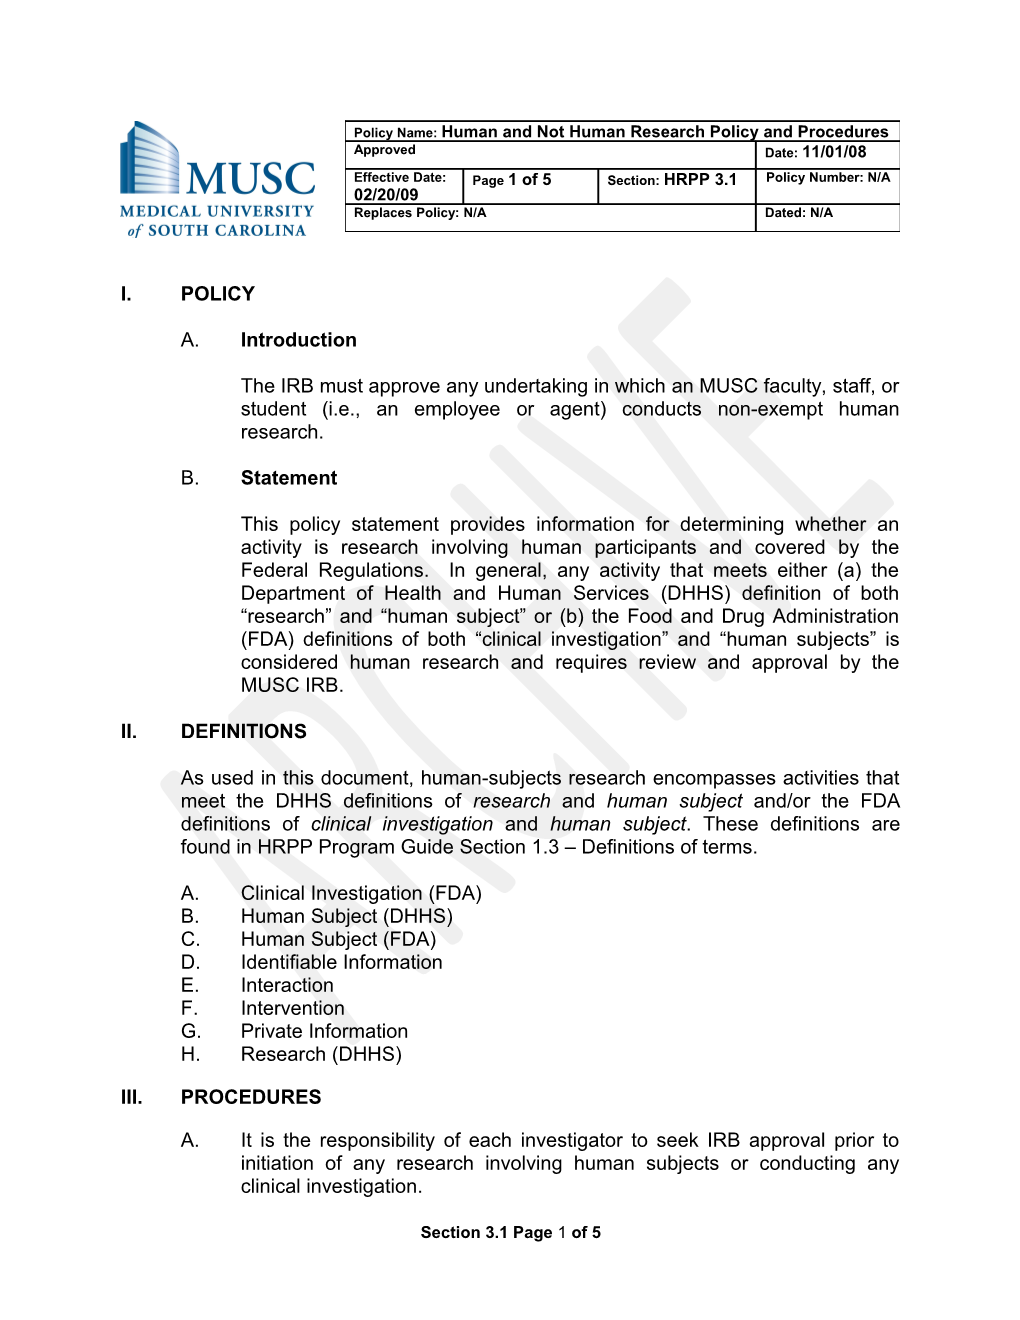 The IRB Must Approve Any Undertaking in Which an MUSC Faculty, Staff, Or Student (I.E